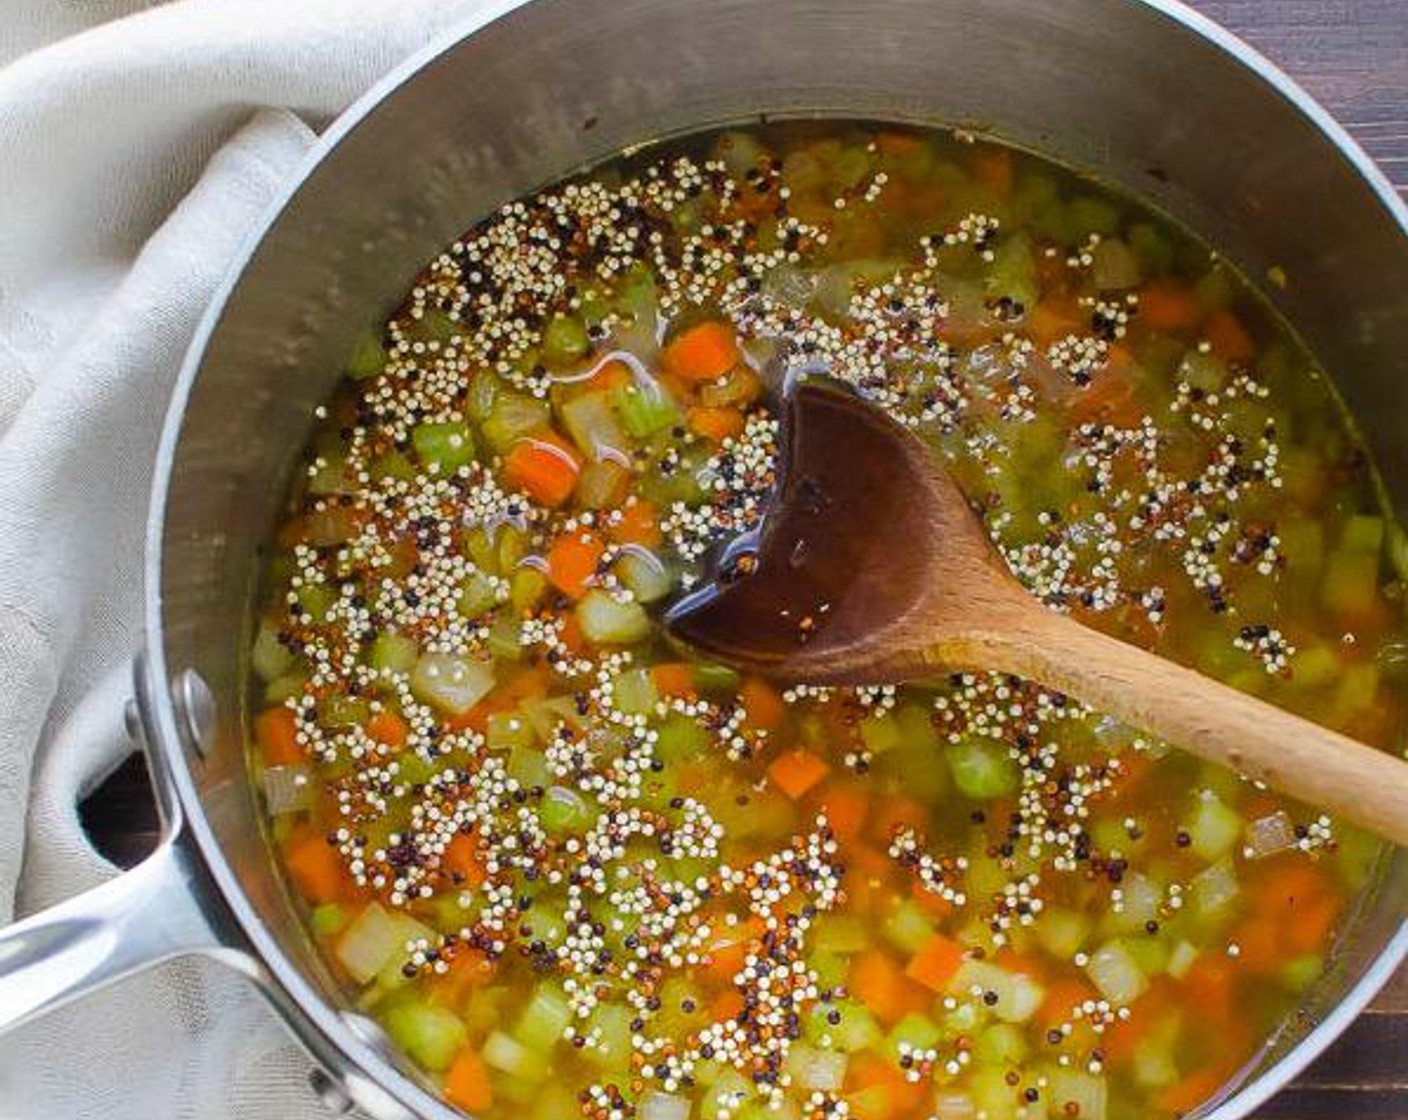 step 3 While lentils are cooking, heat Olive Oil (1 Tbsp) in a medium saucepan over medium heat. Add diced celery, carrots, and onion. Cook until slightly softened, 4-5 minutes. Add Quinoa (3/4 cup) and Water (1 1/2 cups) and bring to boil.